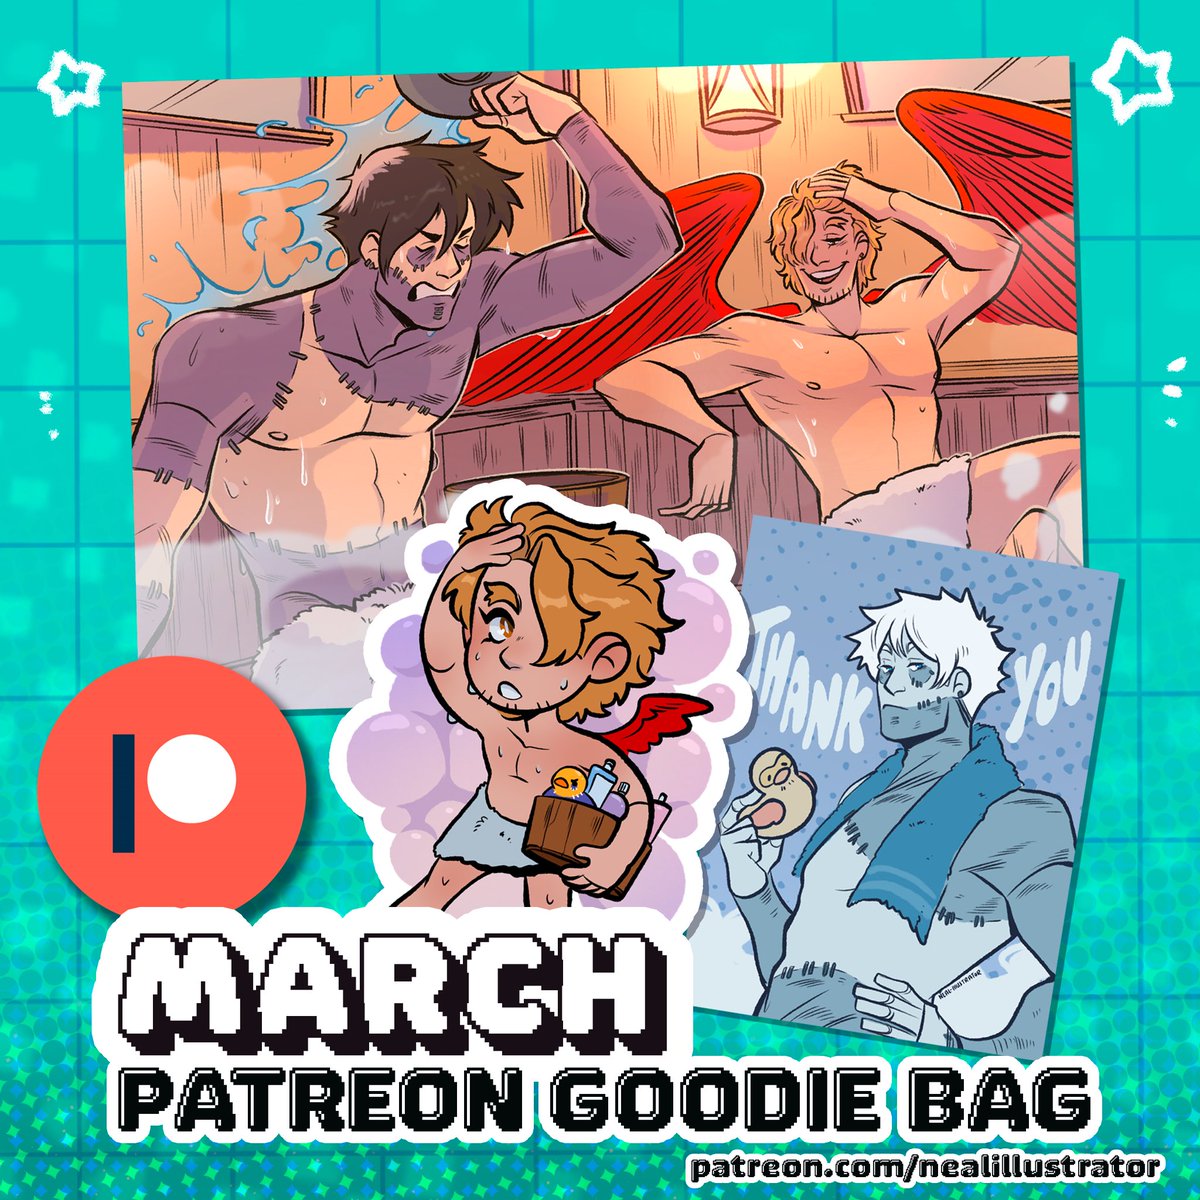 Steamy sauna bonding over on the patreon! 🔥🔥🔥 If you want to snag this goodie bag be sure to join the party over on my patreon before the end of the month! patreon.com/user/membershi…